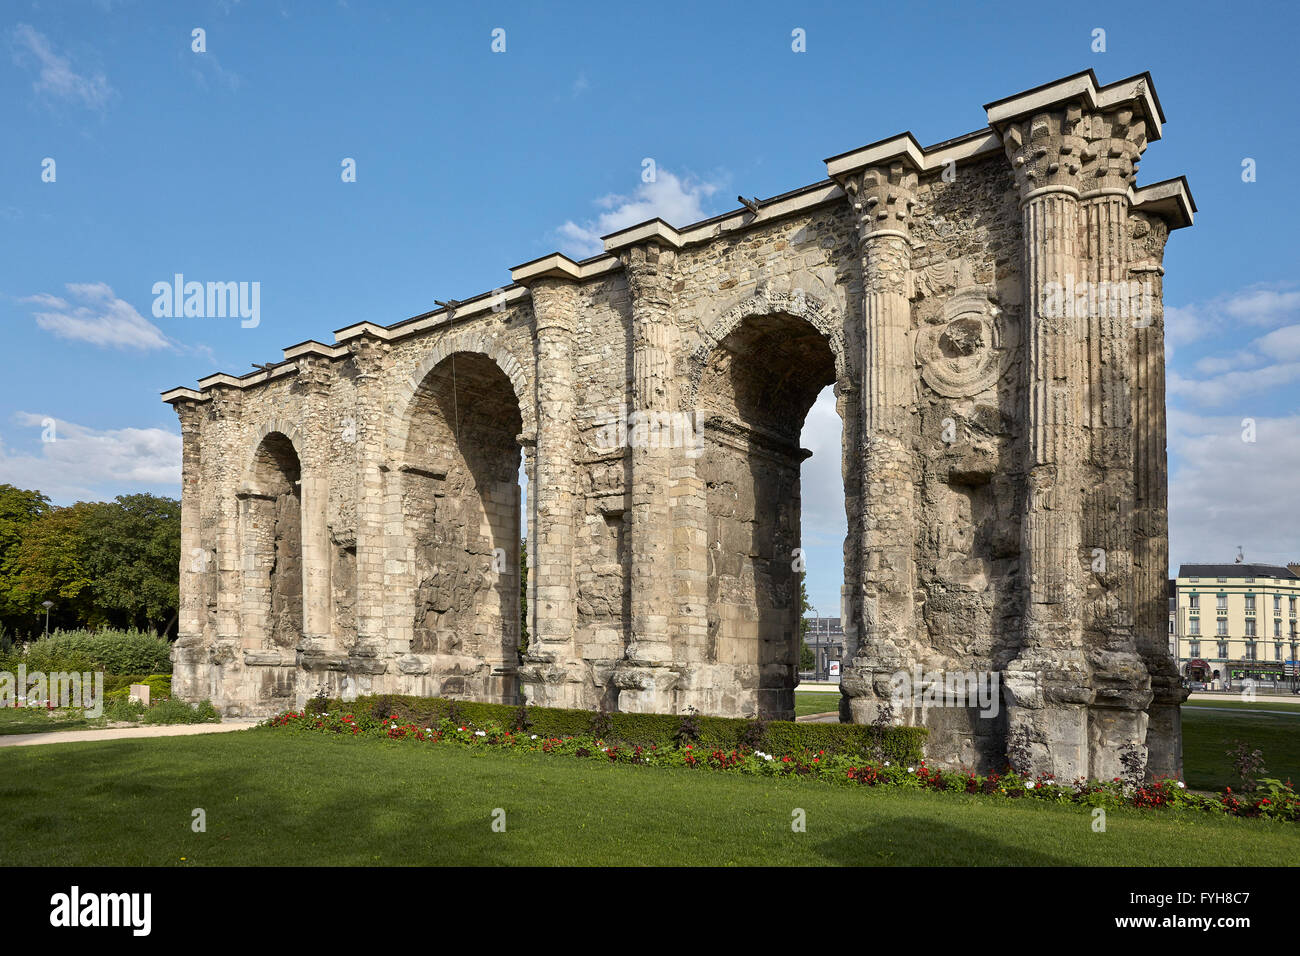 The Mars Gate. Reims. Champagne-Ardenne. France. Stock Photo